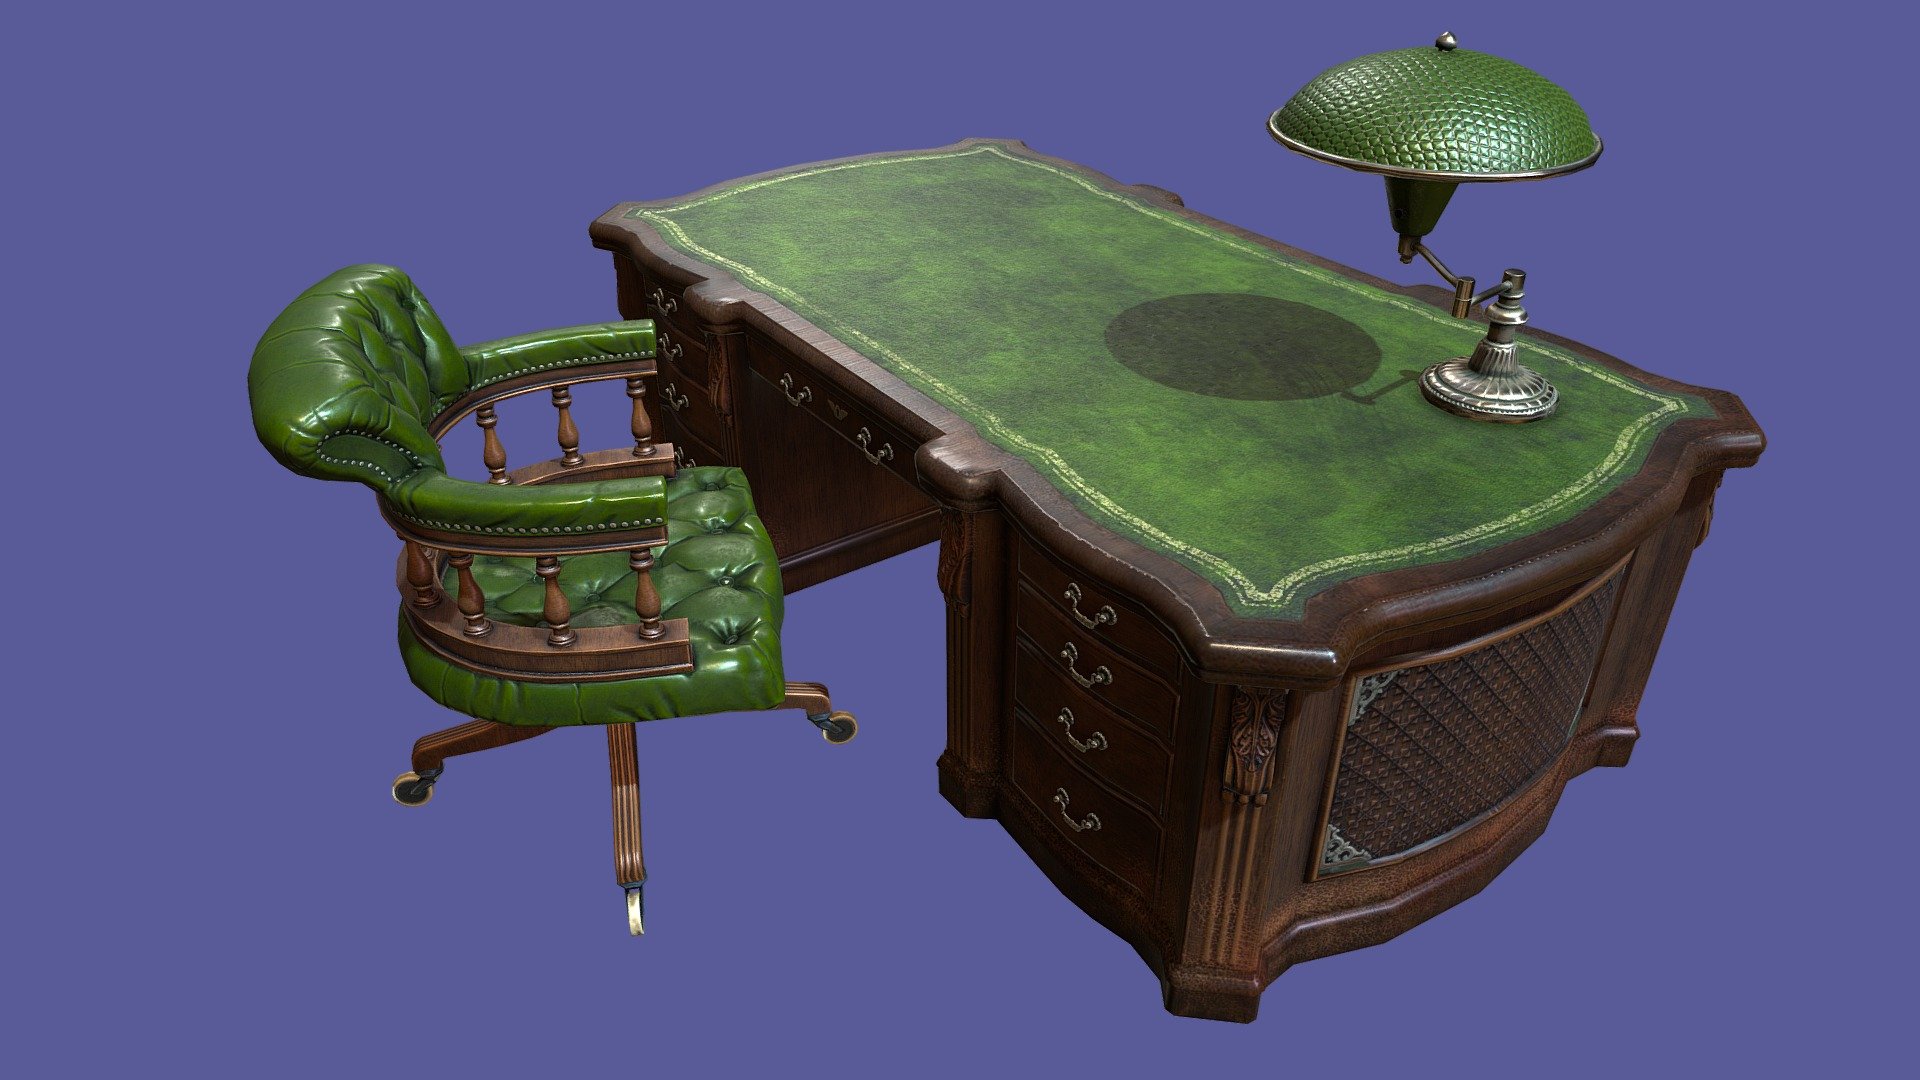 This is part of an antique looking, noir themed office desk with a lamp and chair 3d model